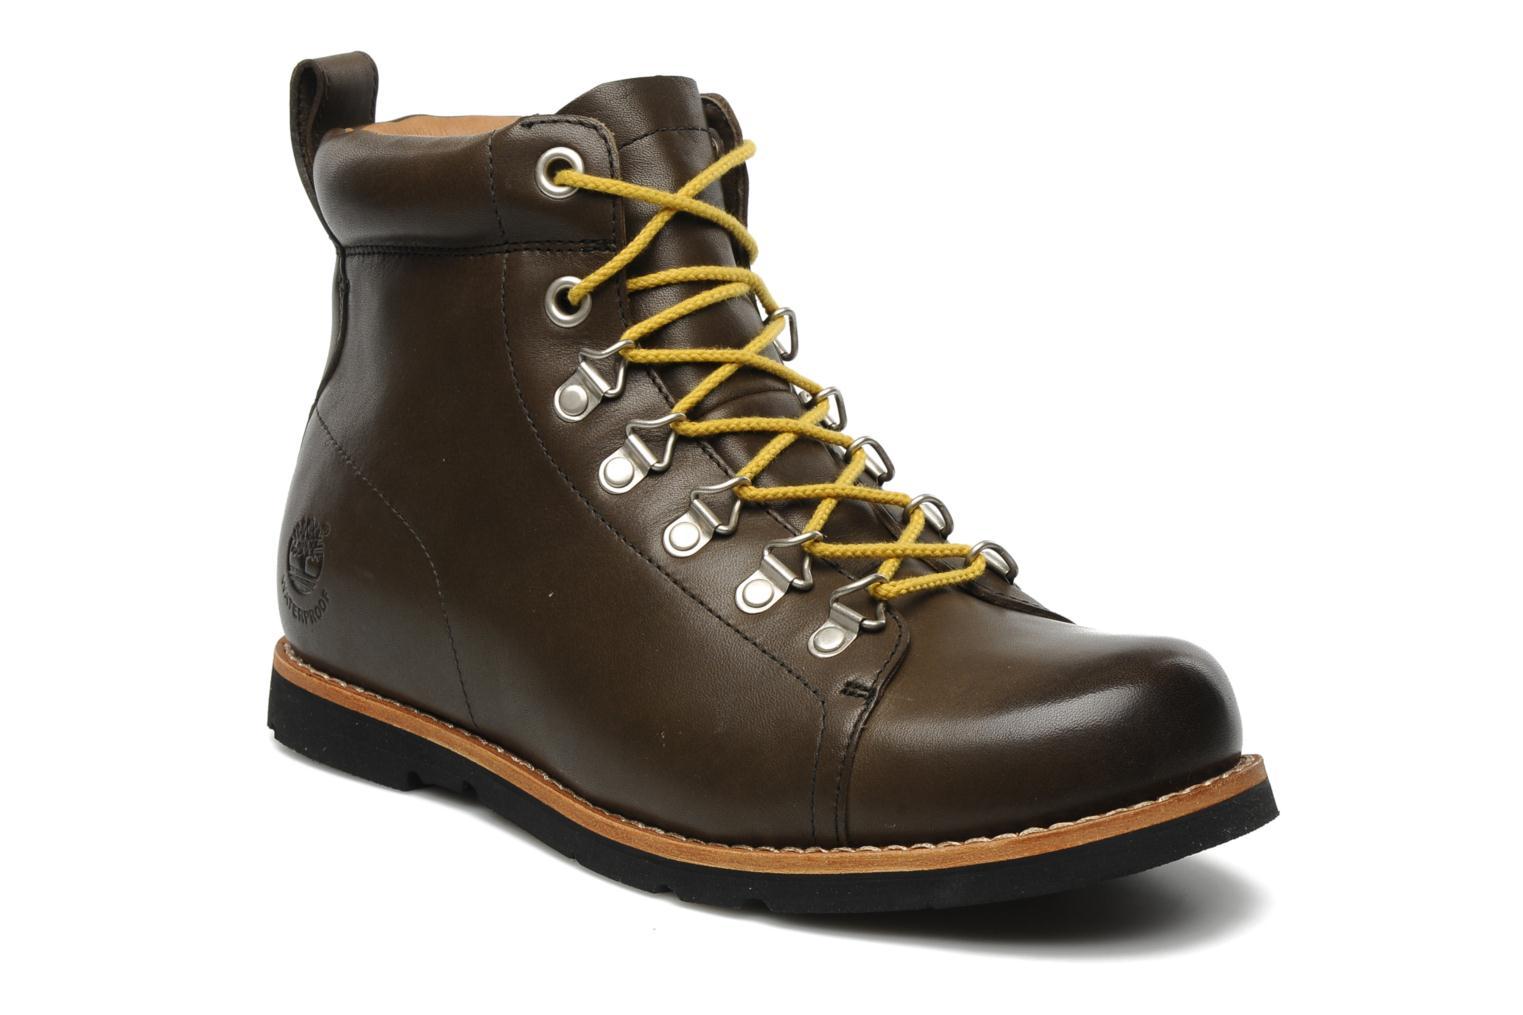 Foto Botines Timberland Earthkeepers 2.0 Rugged Lace to Toe Chukka Hombre foto 109875